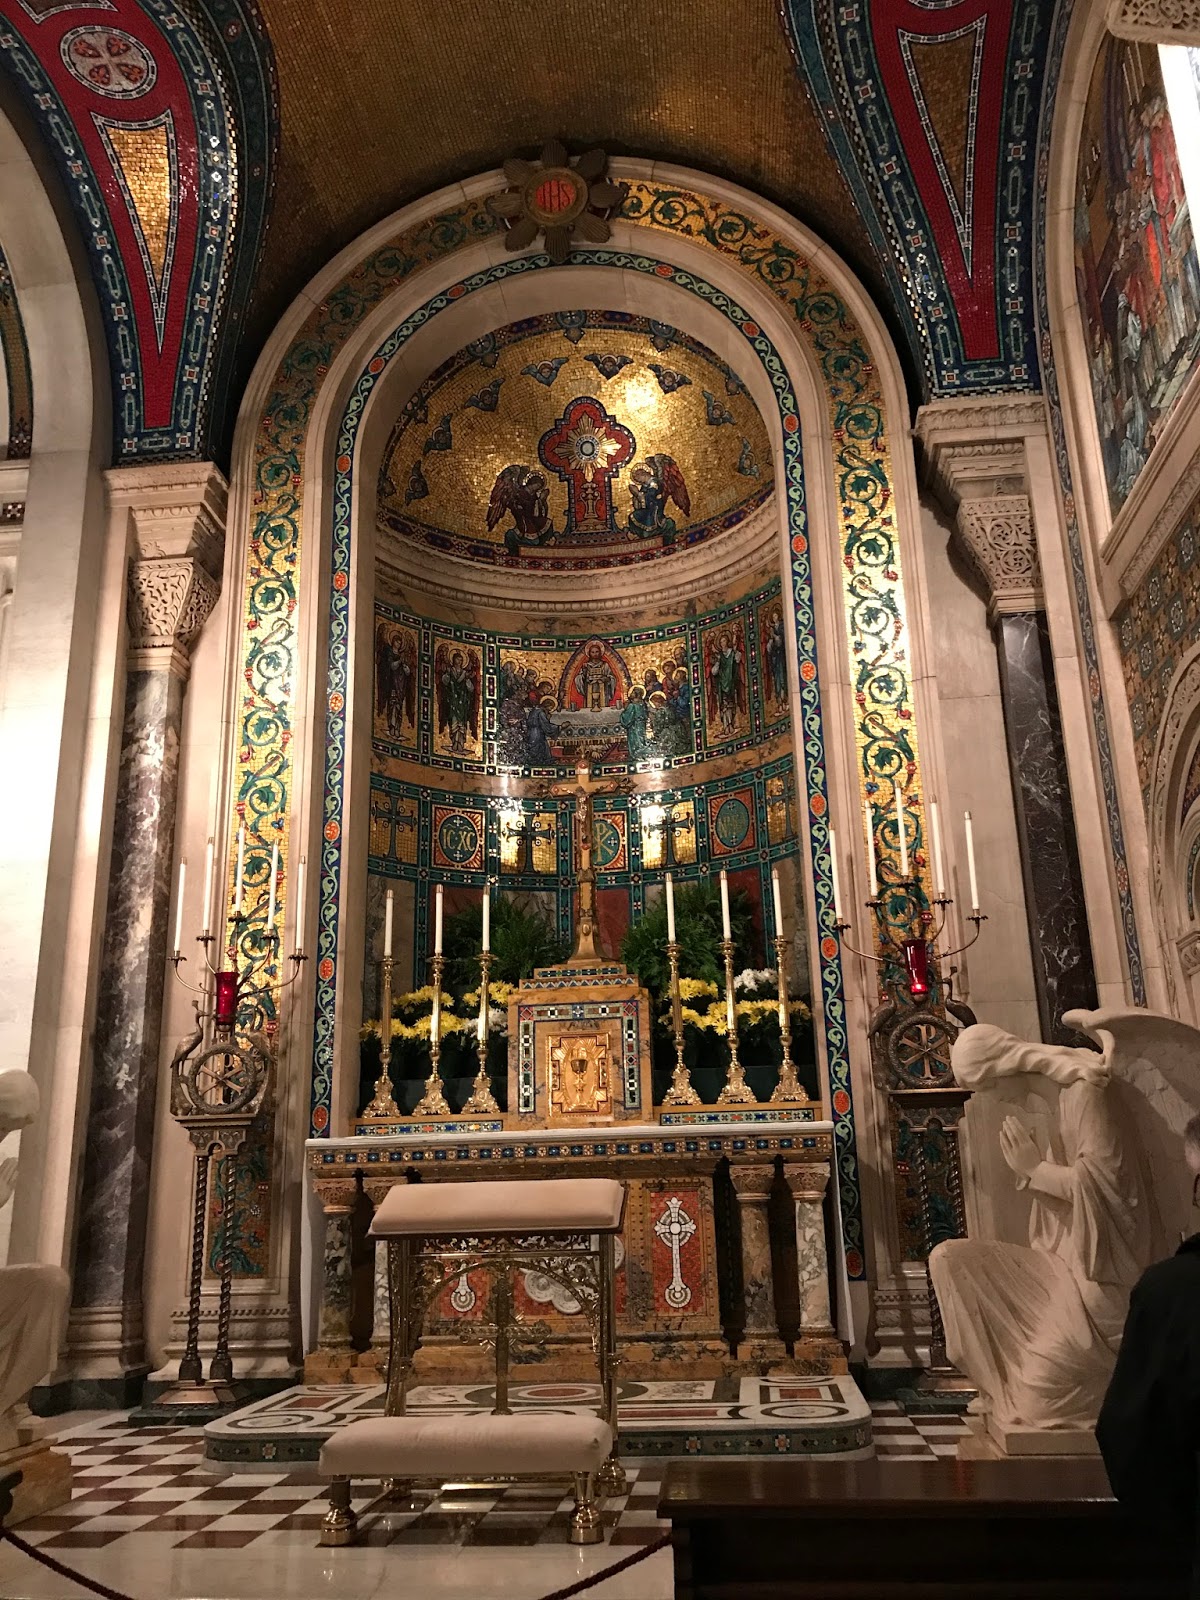 5th-Wheel Wanderings: St. Louis Cathedral Basilica